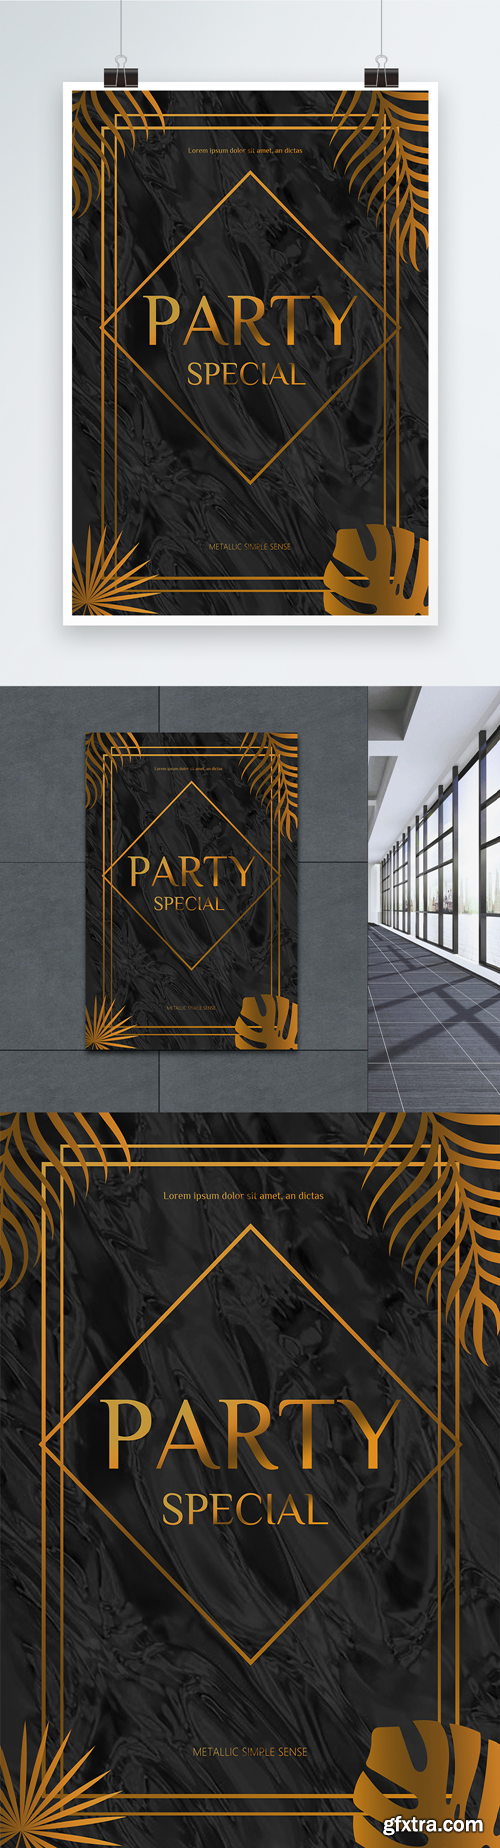 golden leaves border marbled party poster